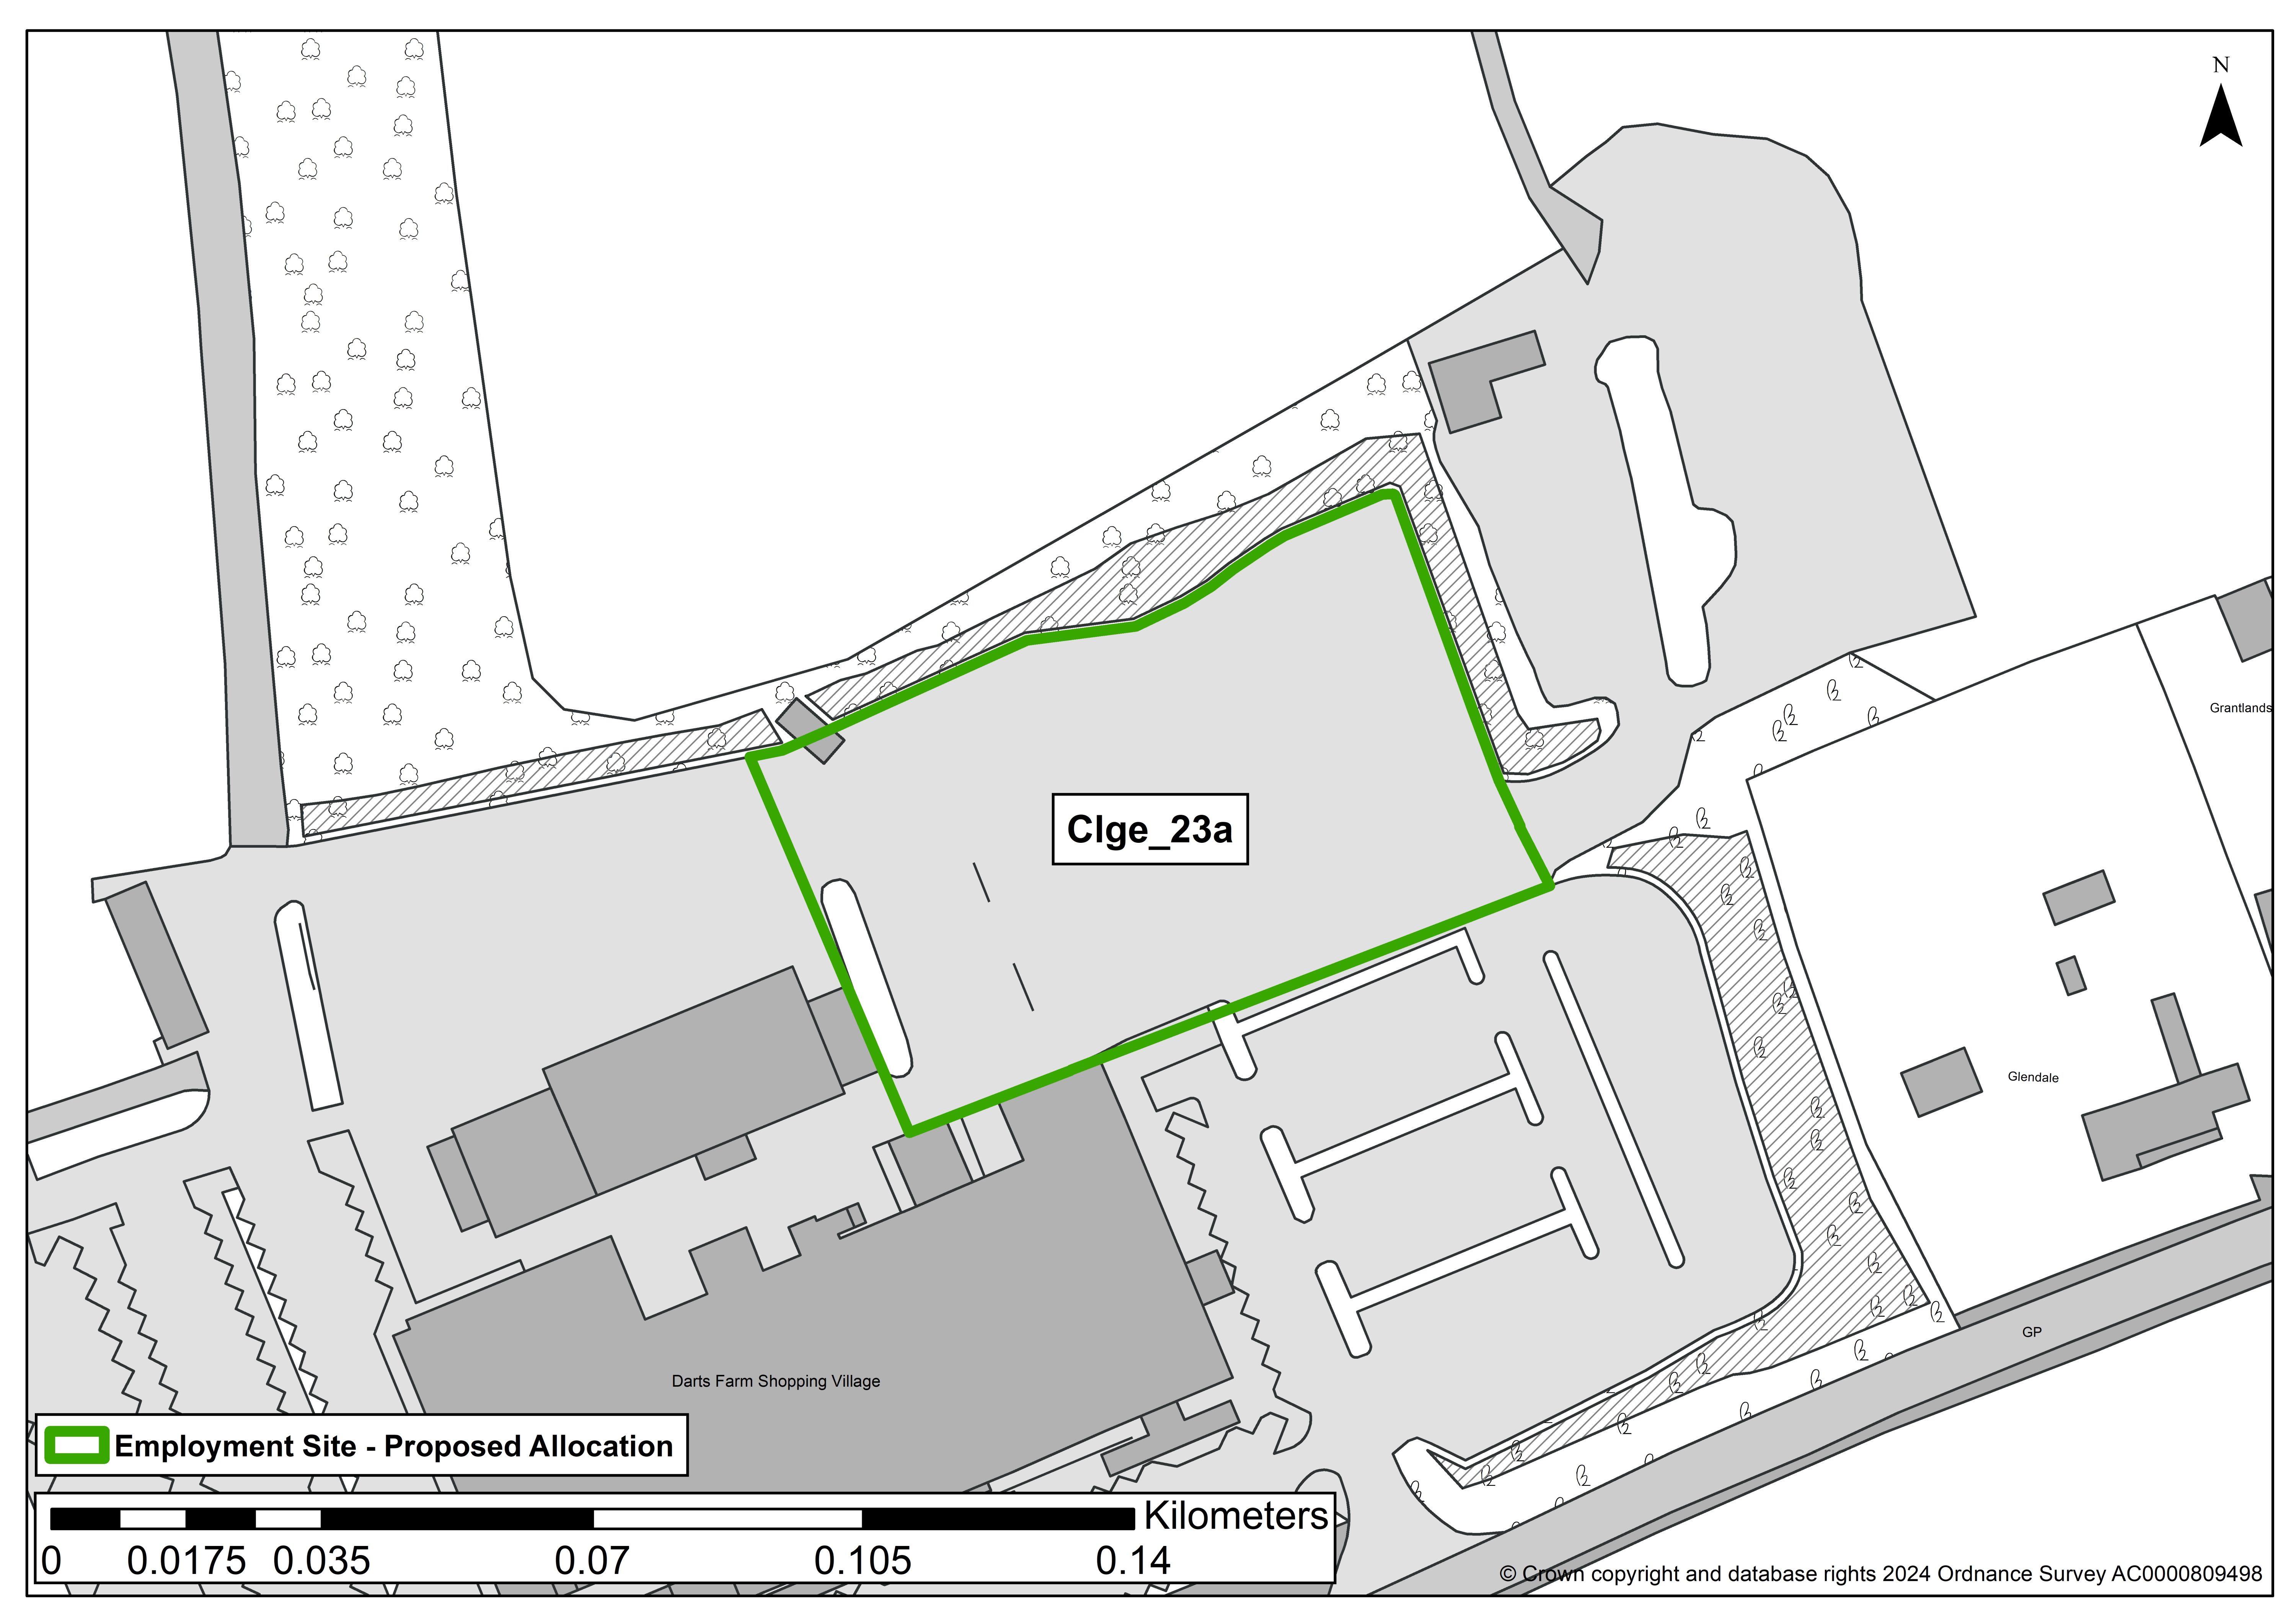 Map of site Clge_23a